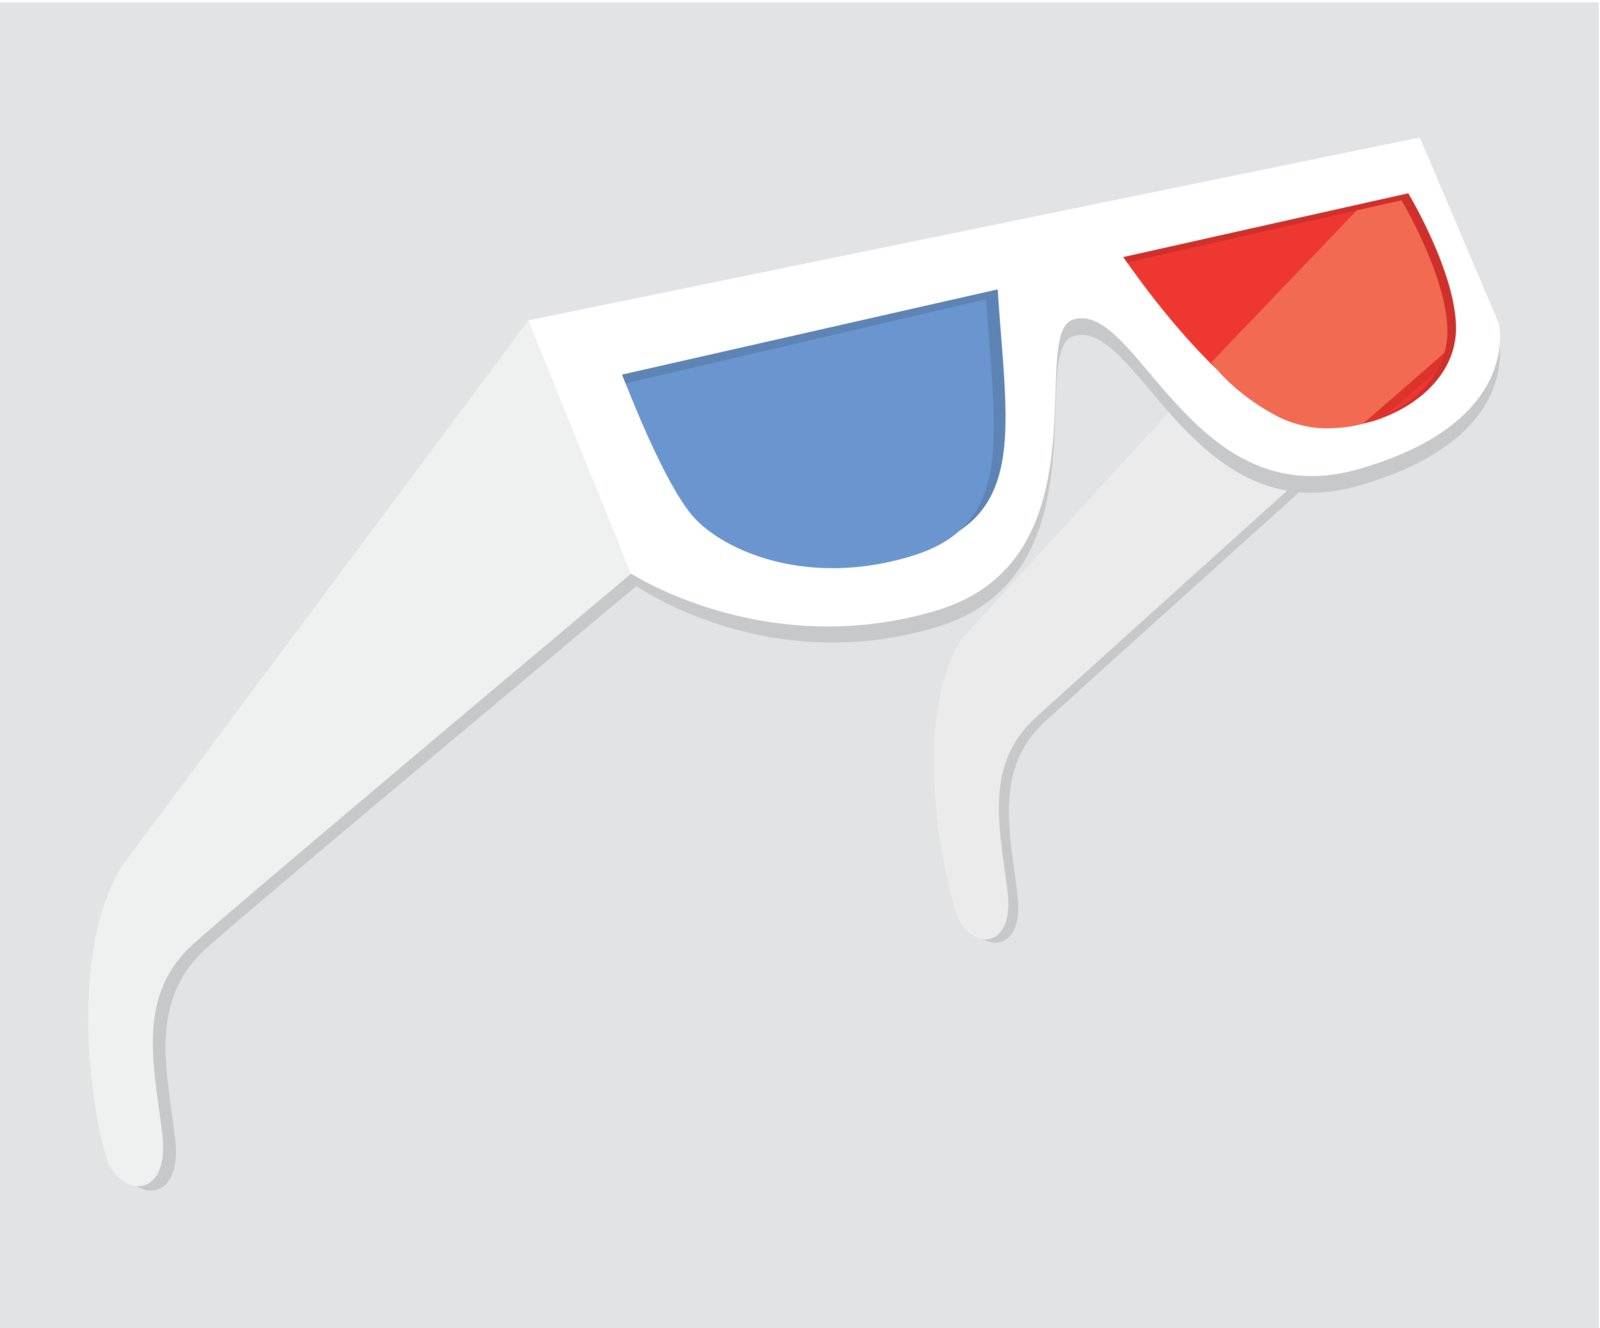 3D Glasses - Three dimensional movies by curvabezier